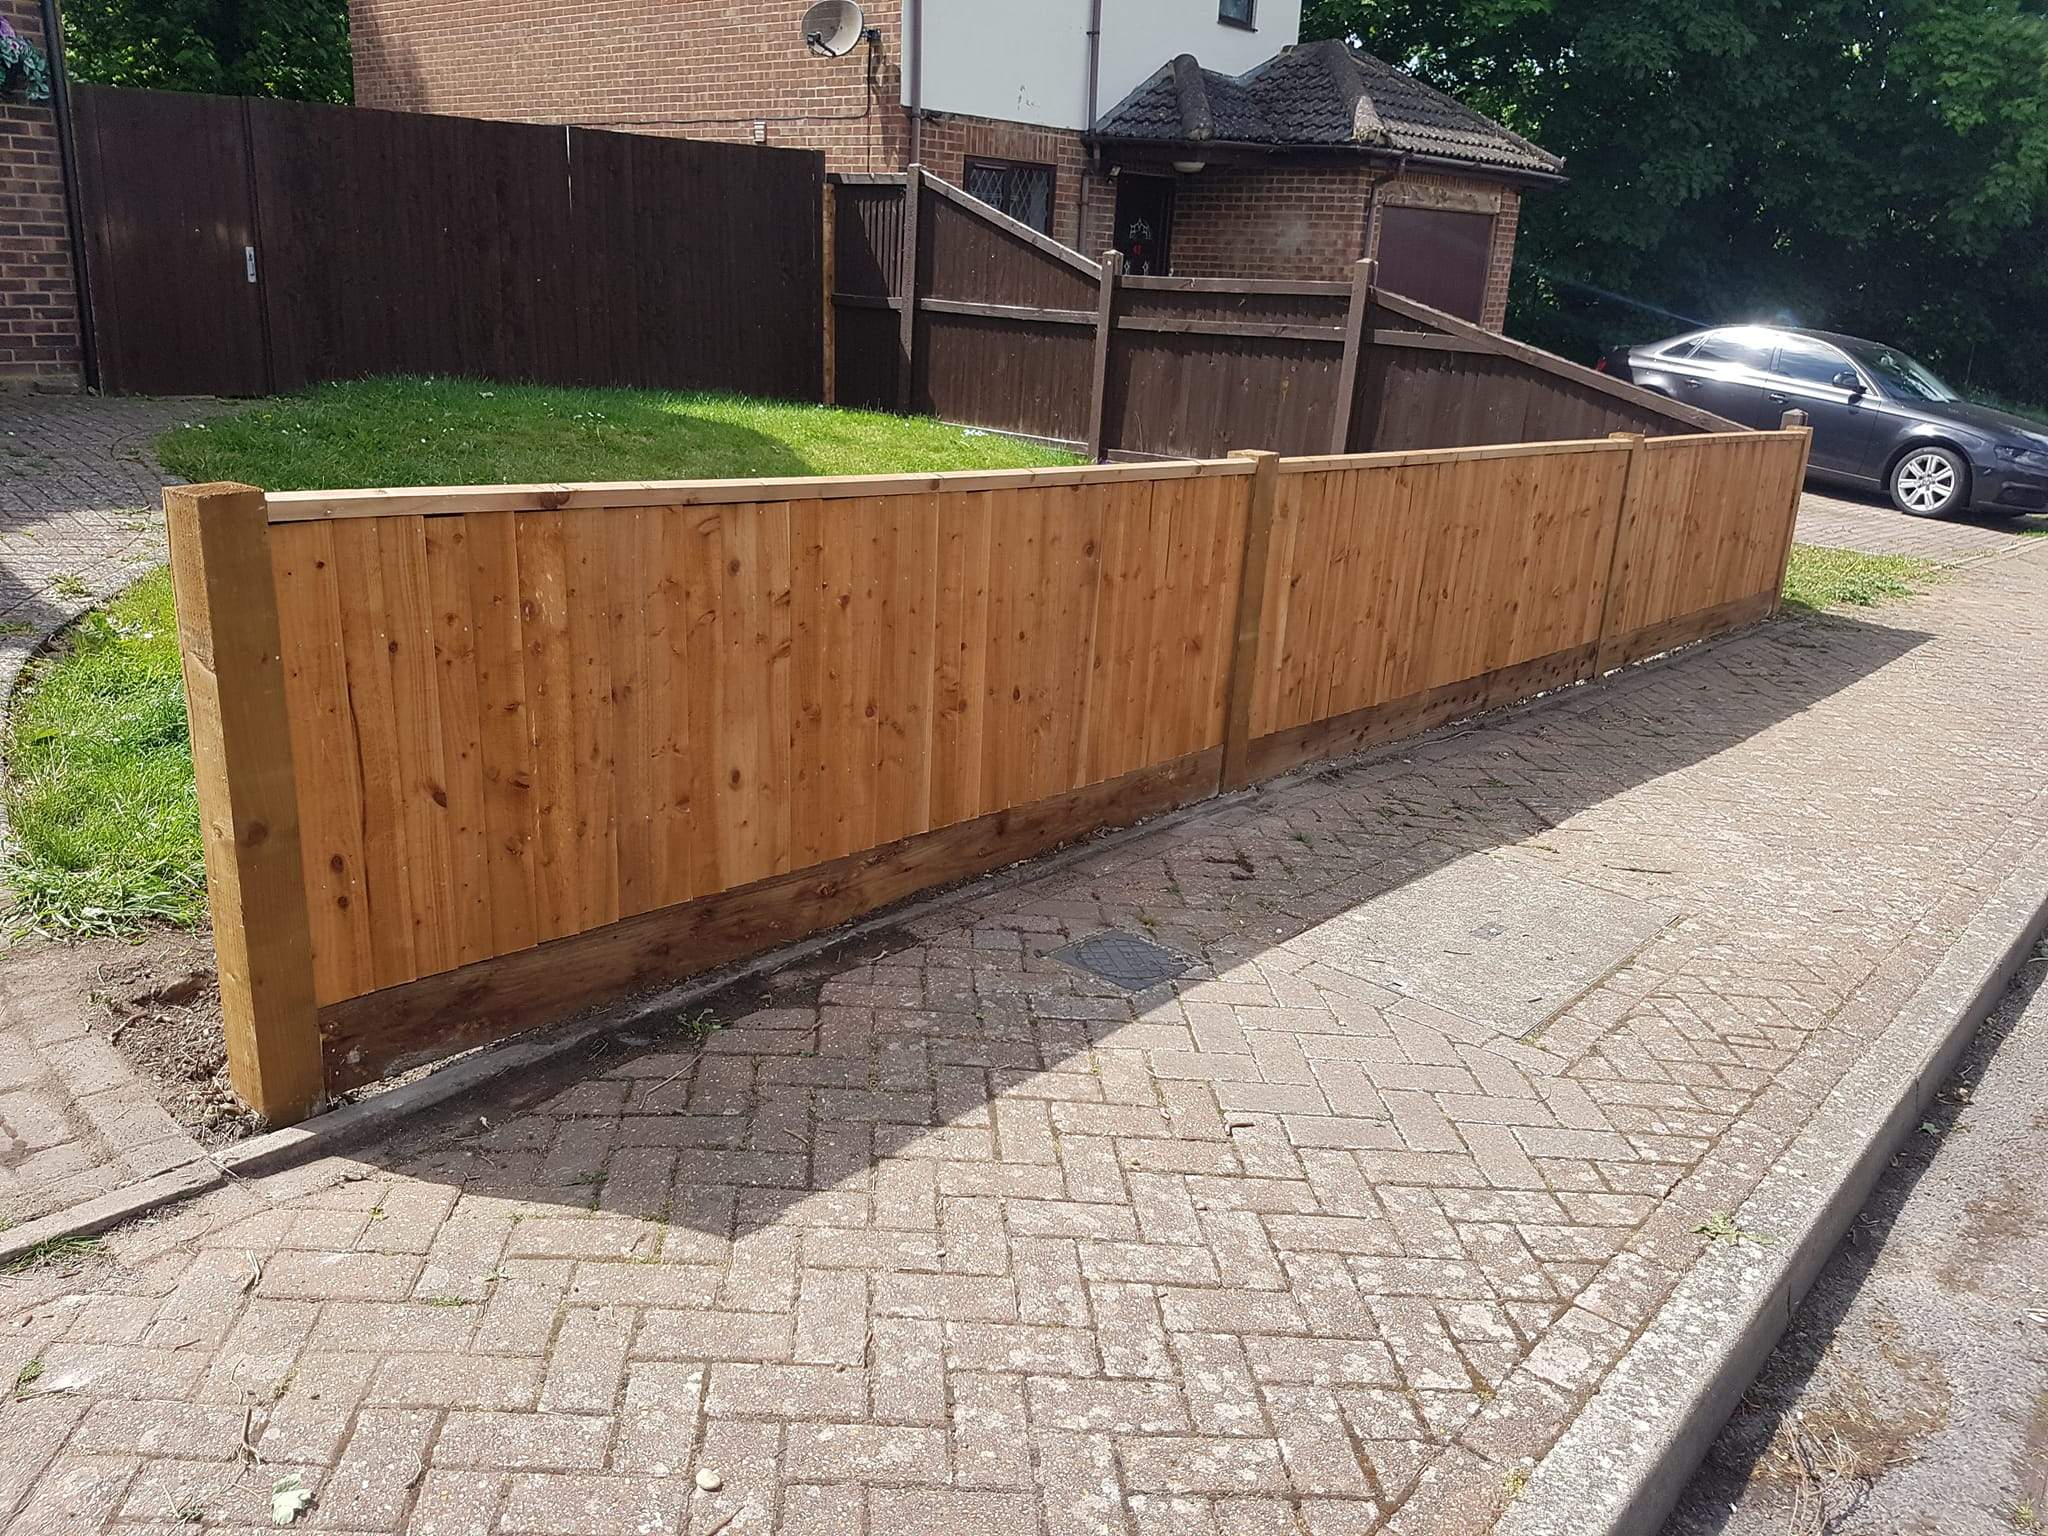 with a top cap to finish of a nice front fence, fencing installed in Maidstone